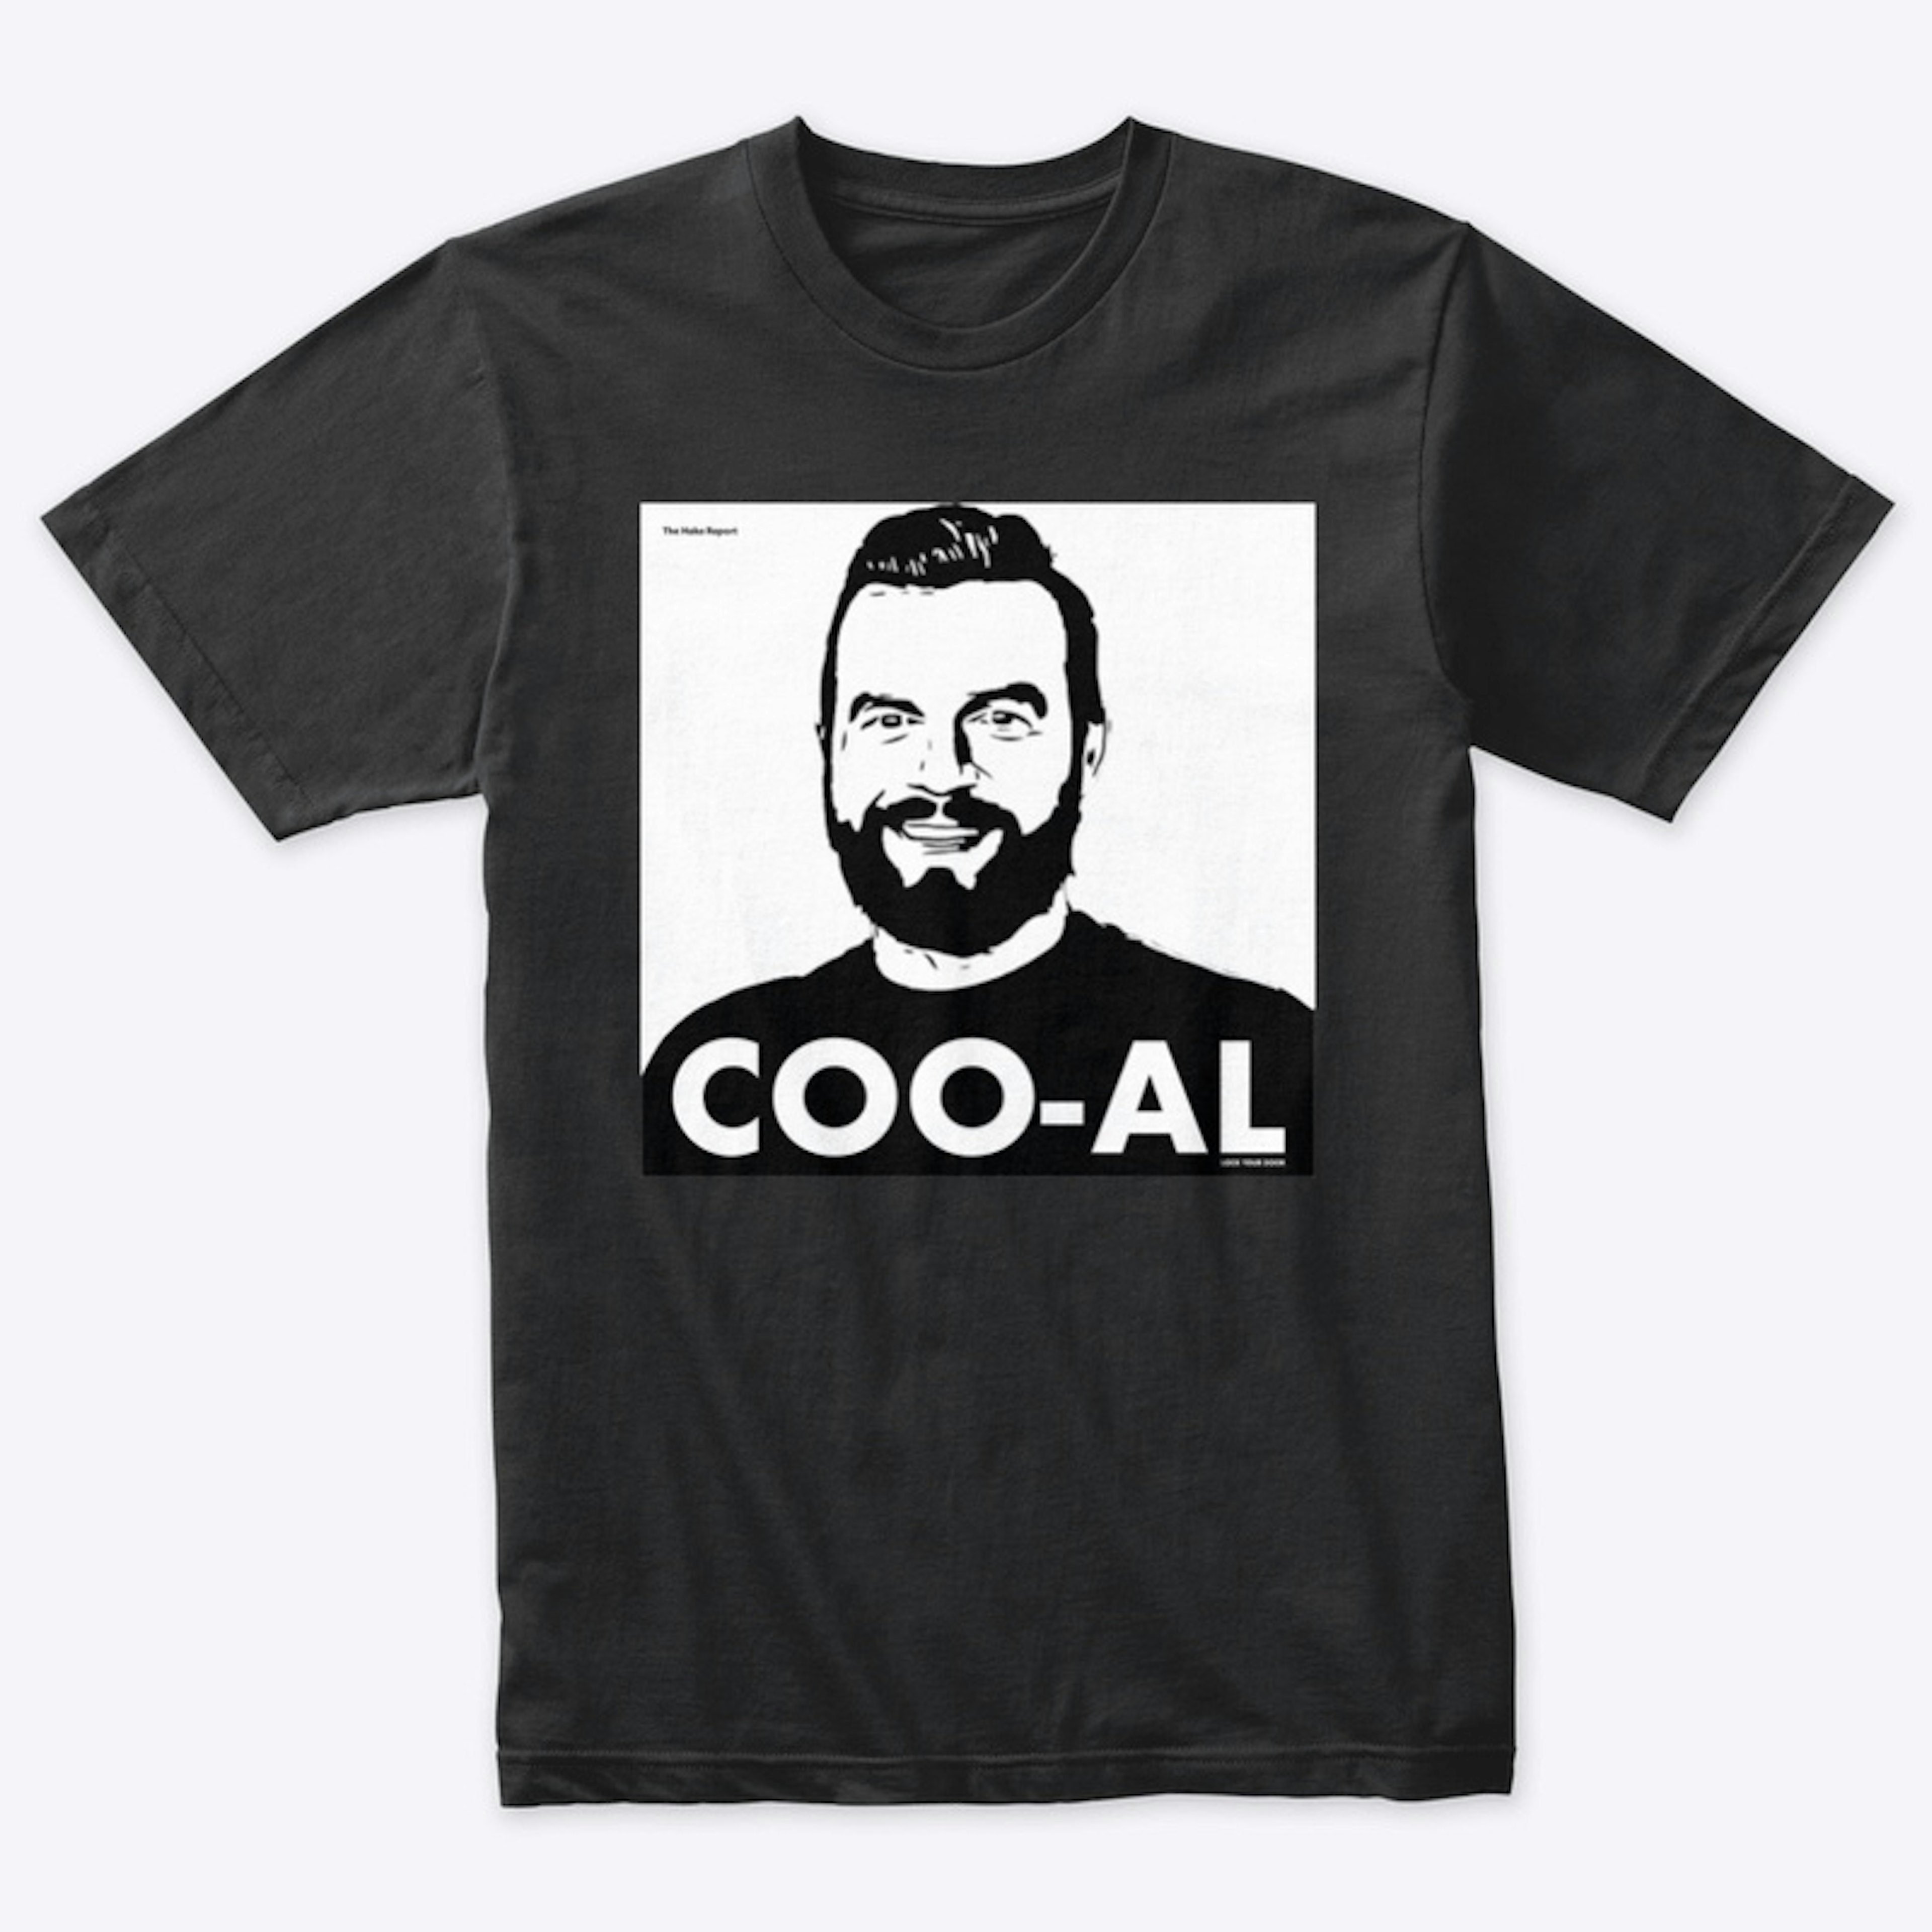 COO-AL (White and Black Ink)